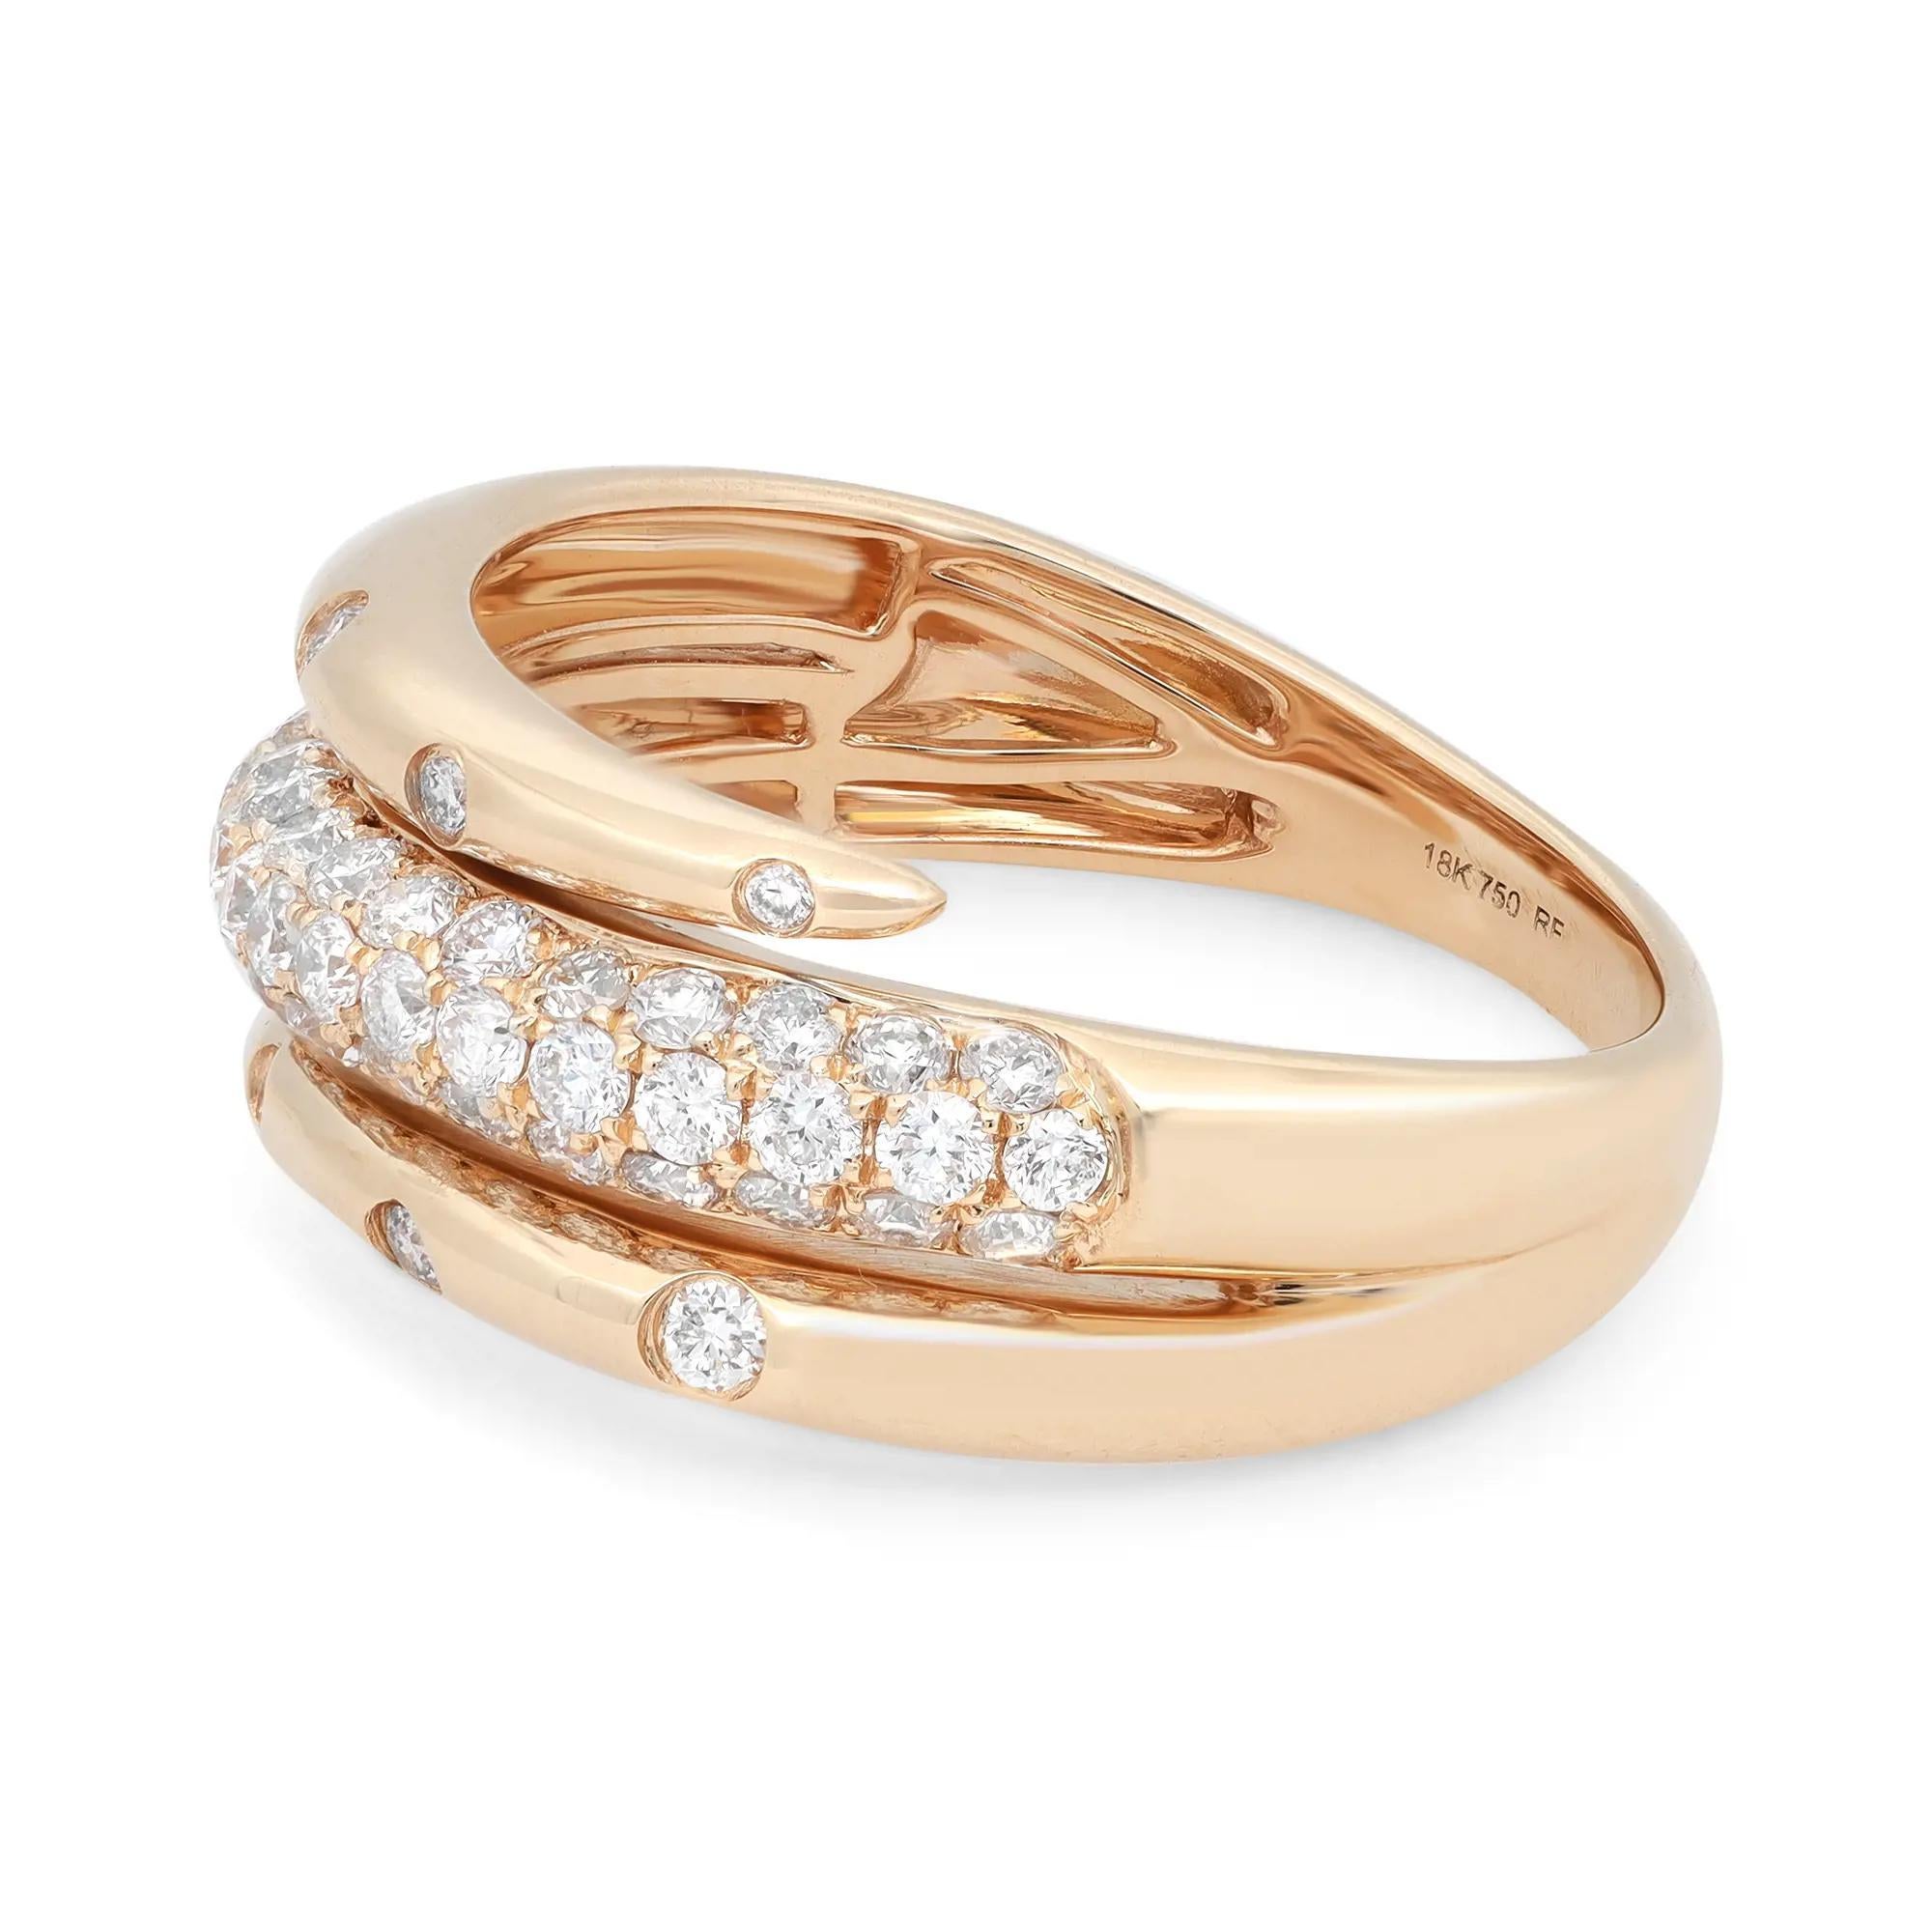 This beautiful spiral diamond ring is all about sparkle and glamour. Crafted in high polished 18k yellow gold. This spiral style features 57 round brilliant cut diamonds with a center row of pave set shimmering diamonds and two half rows with